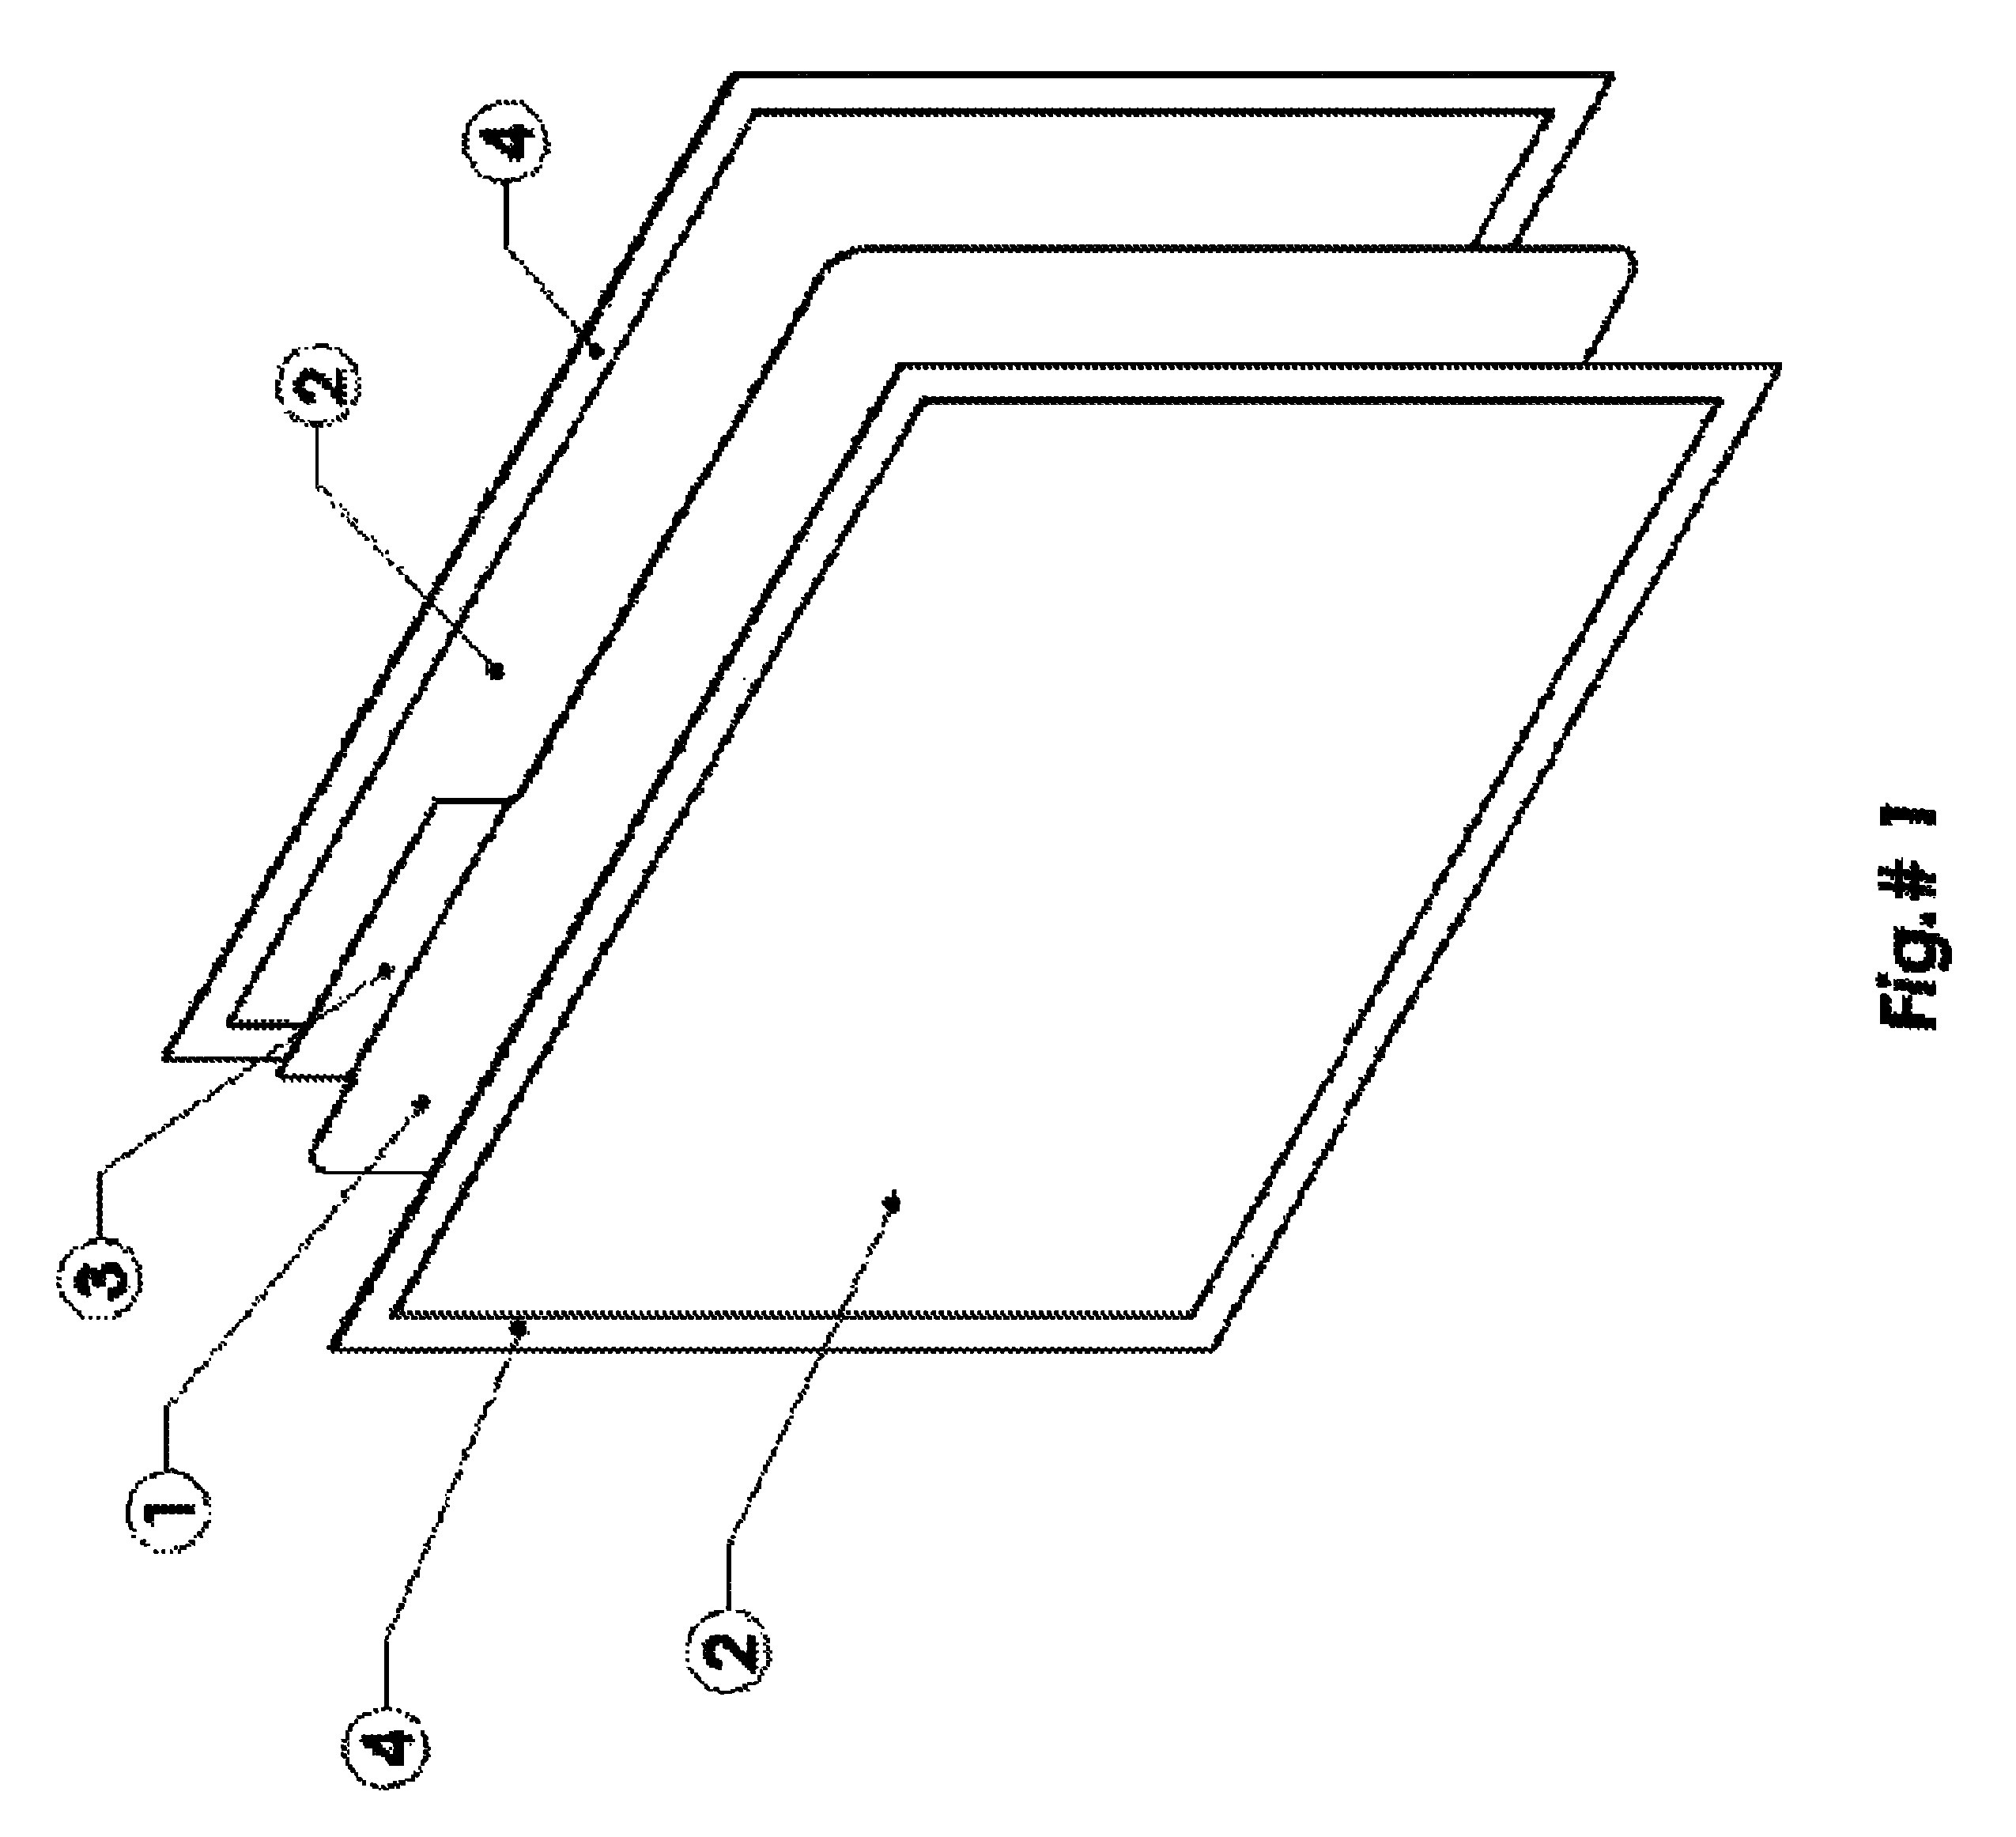 Cell assembly for an energy storage device with activated carbon electrodes